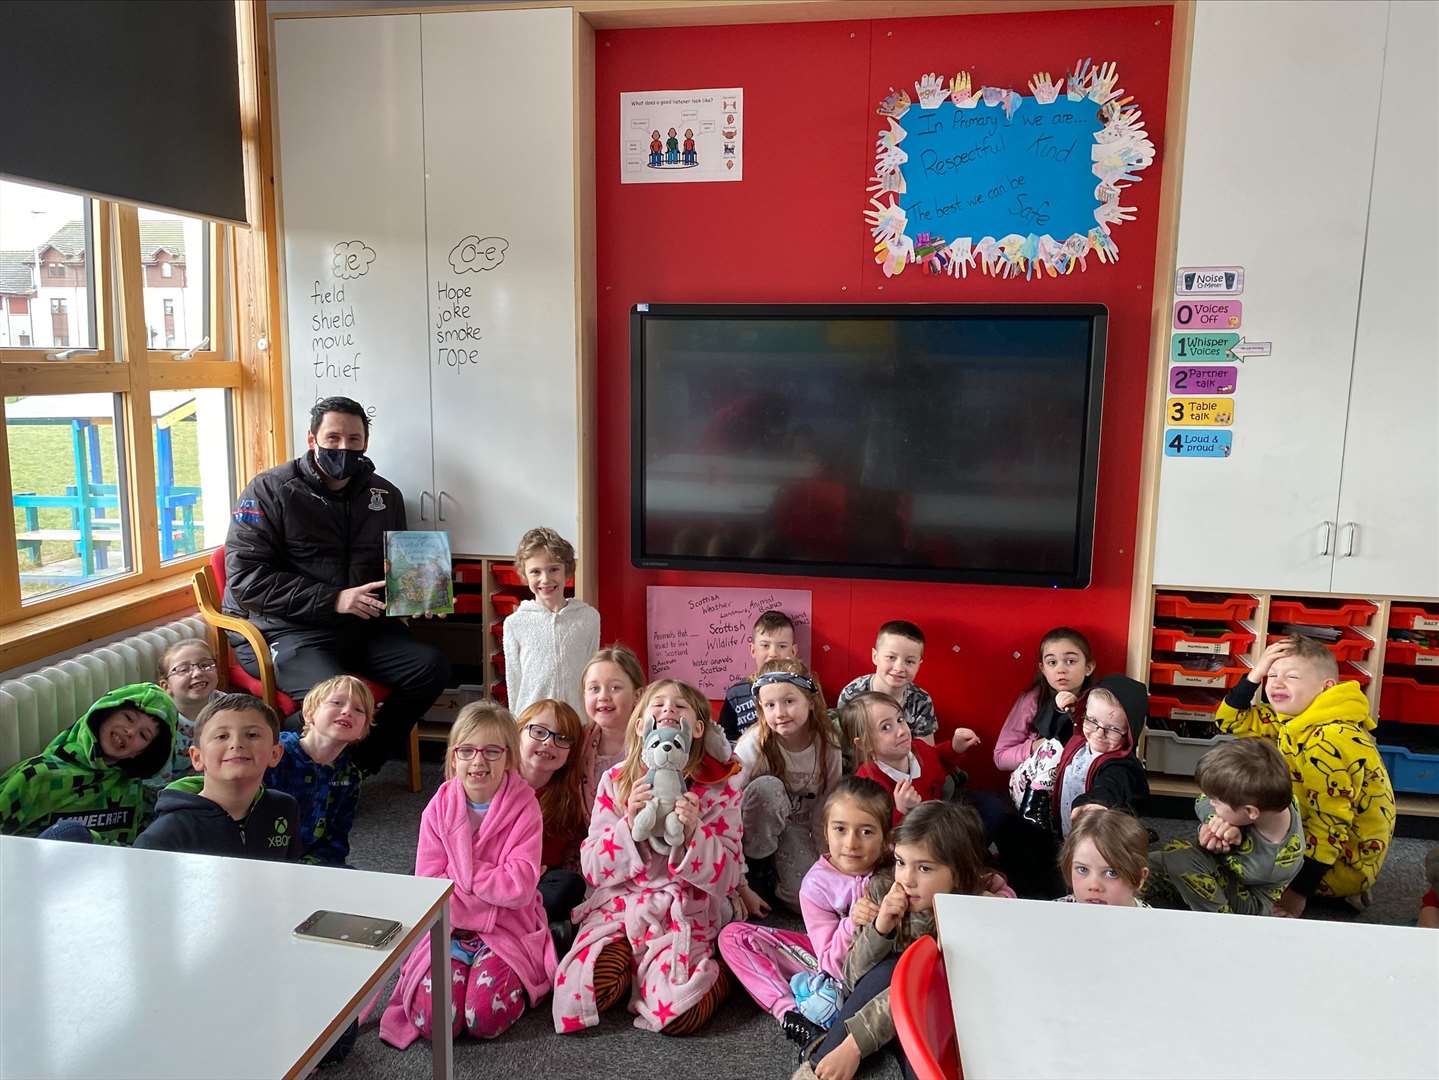 Pupils in Class with their favourite books.